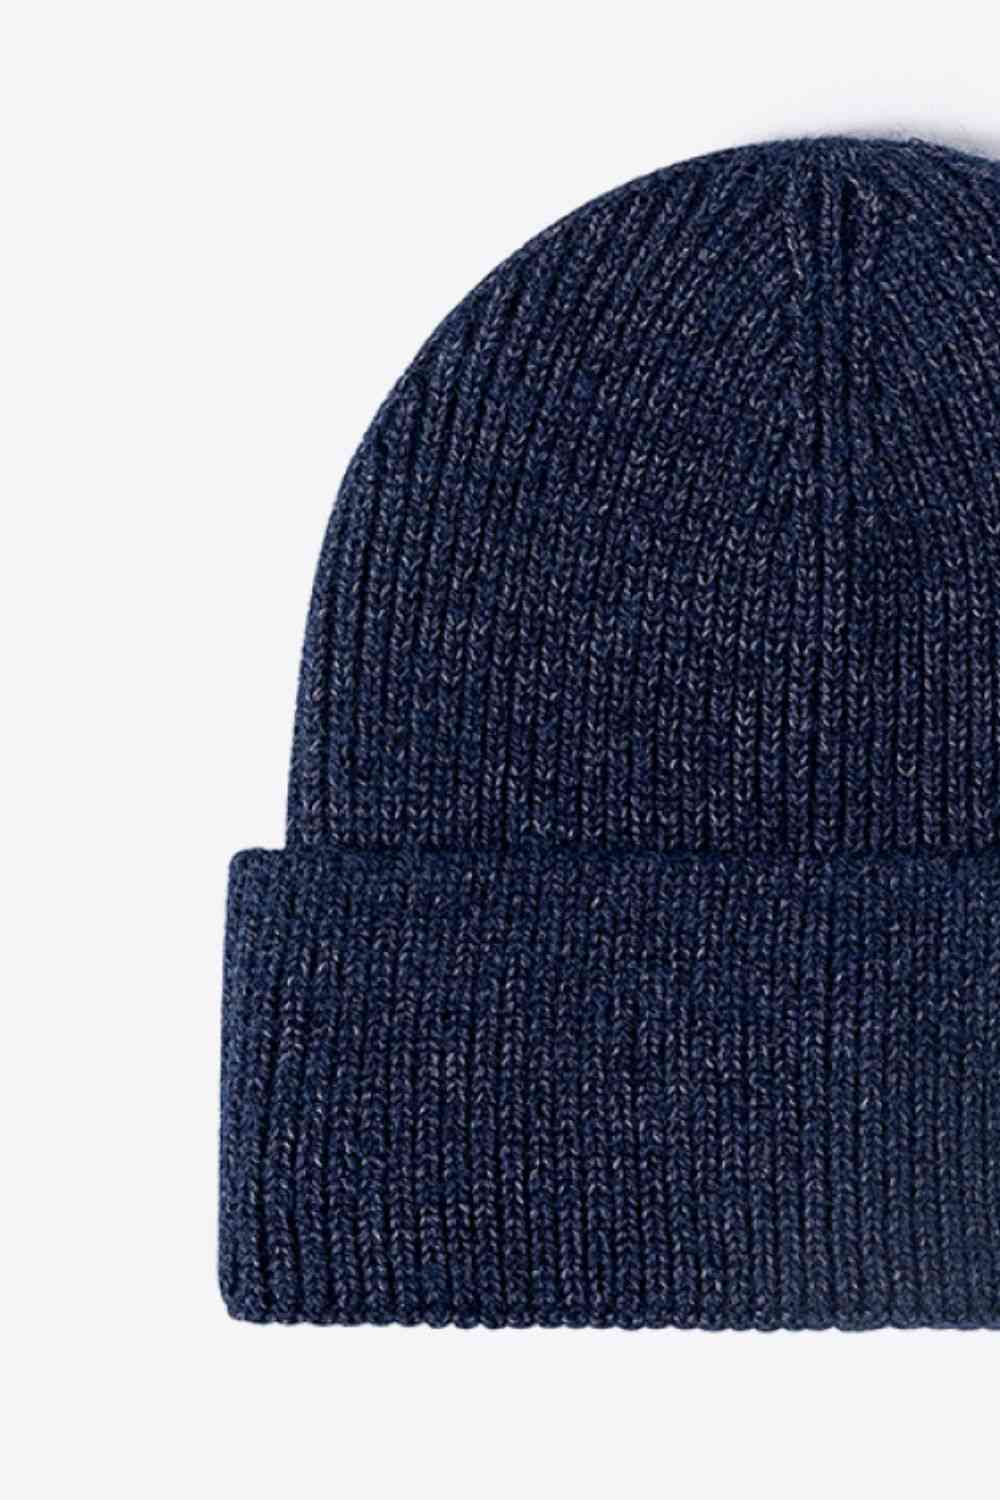 Letter N Patch Cuffed Knit Beanie